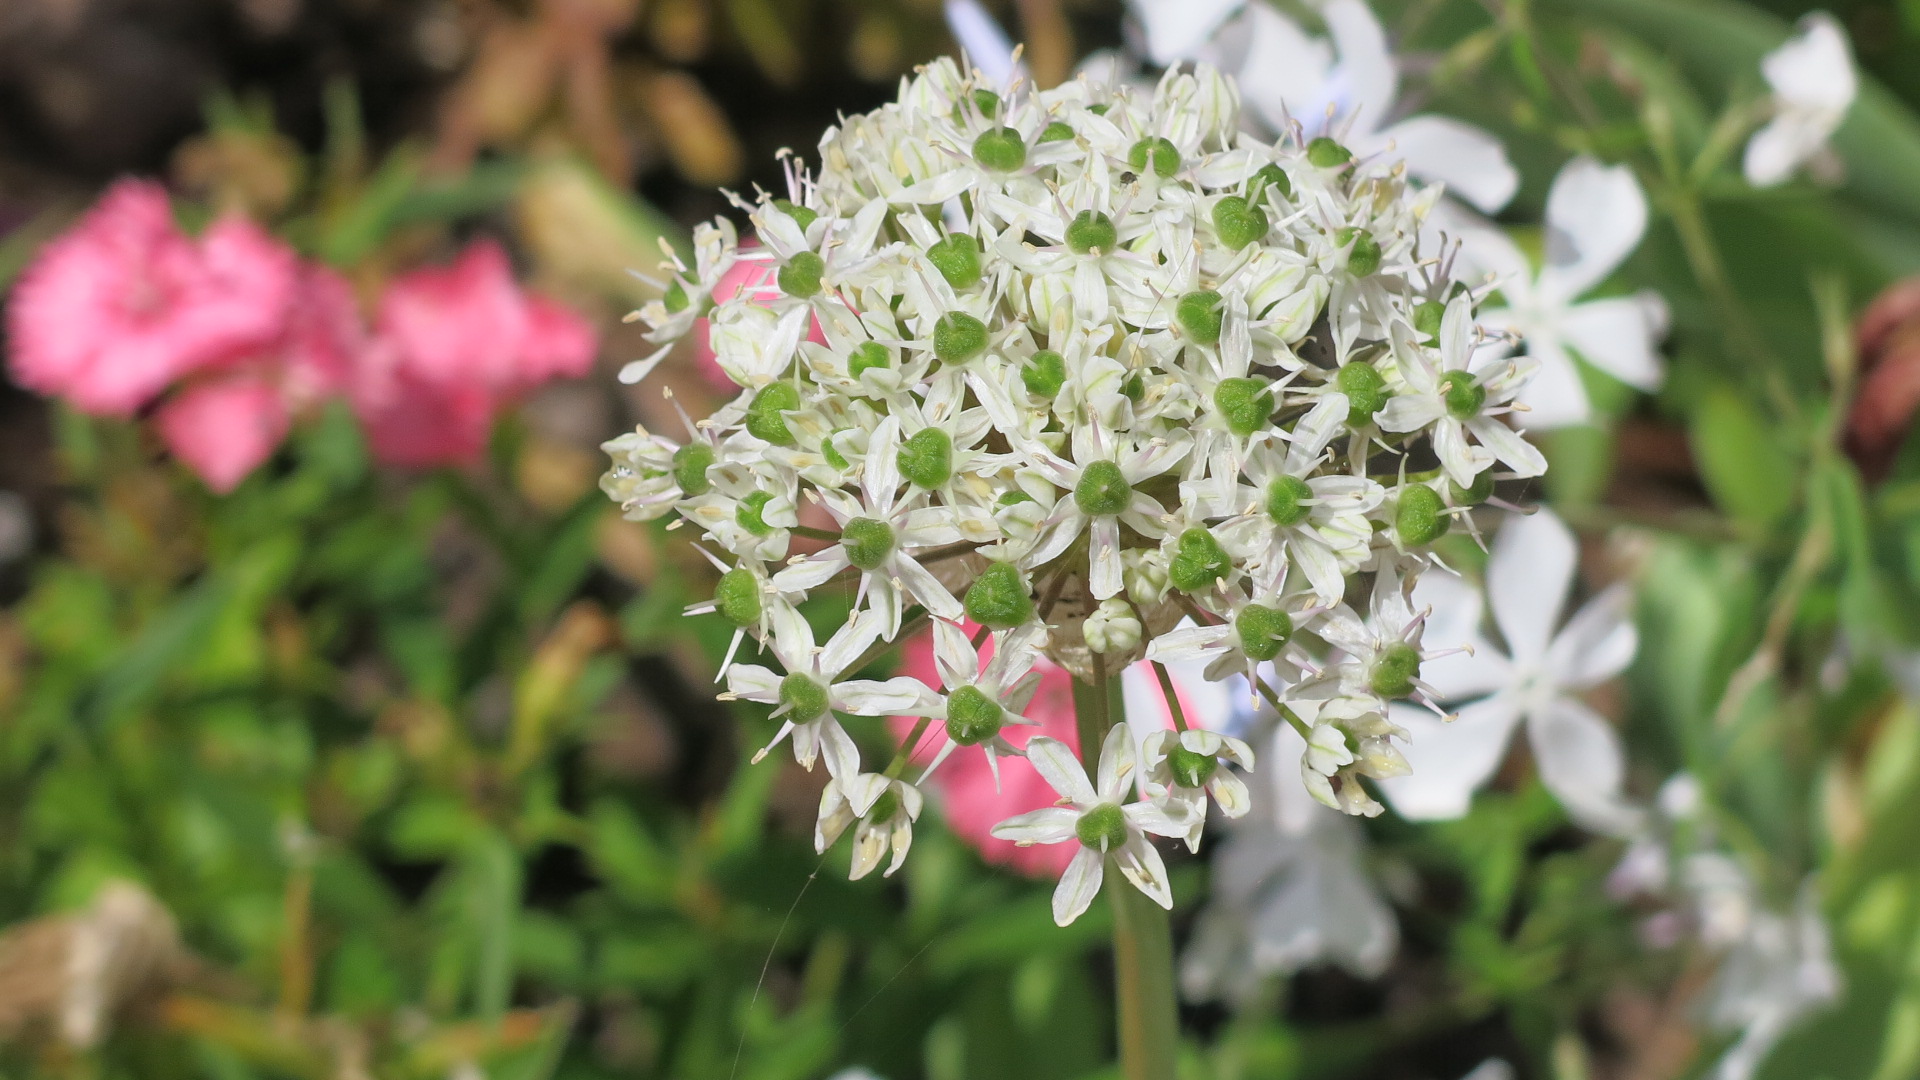 Allium nigrum has white flowers with green "eyes" and blooms in late spring to early summer.